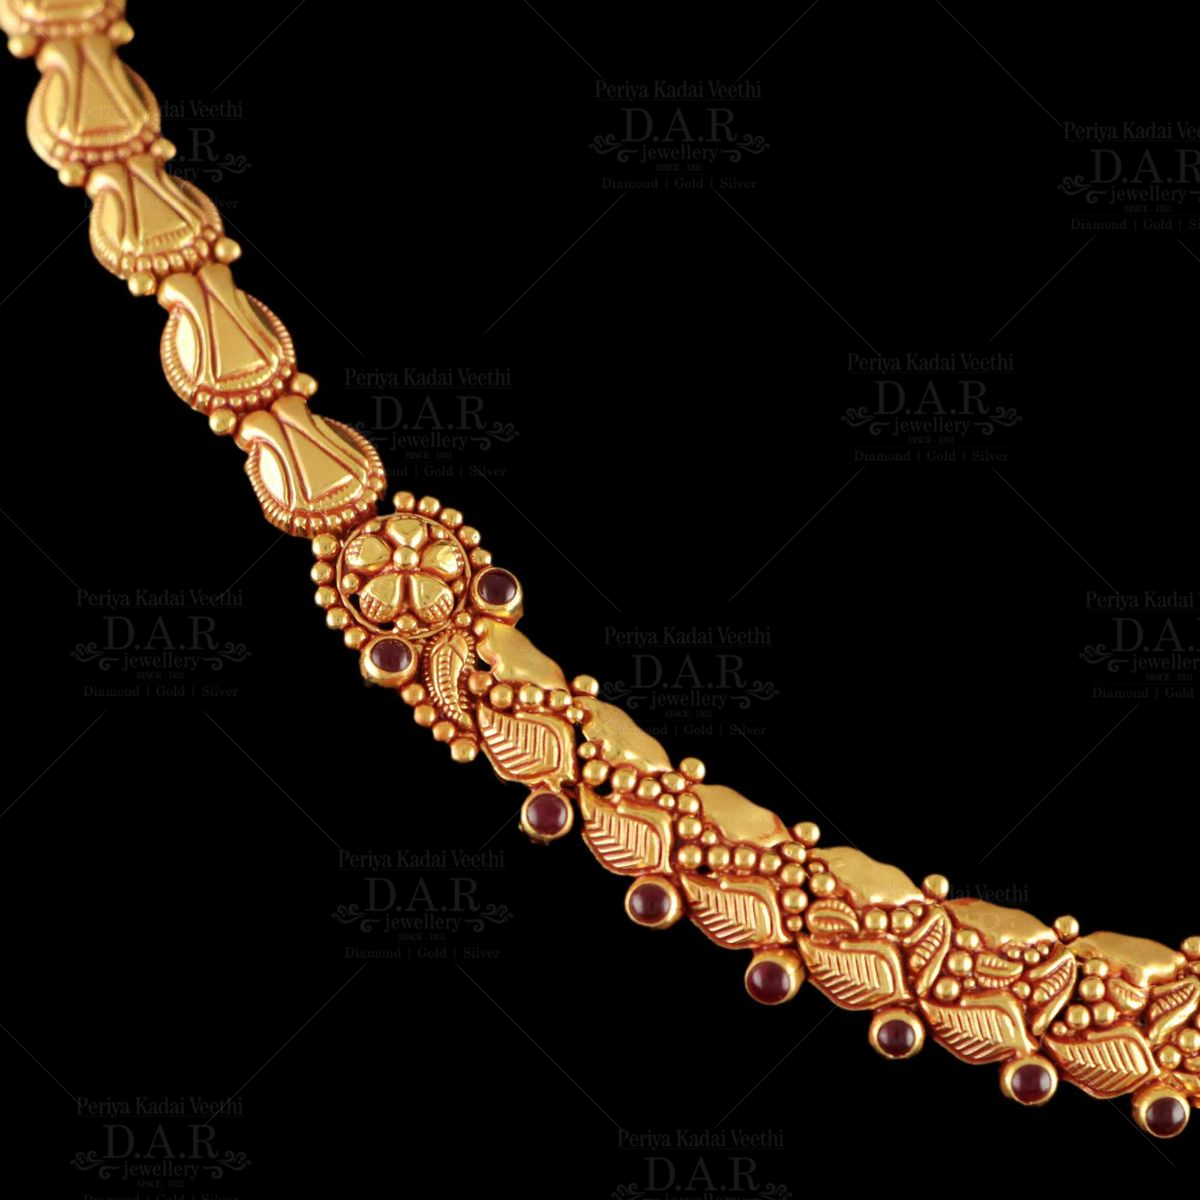 22kt Gold Dokia Chain - chfc22749 - 22K Gold Dokia Chain (16In). Long Dokia  chain is beaded with gold balls in an alternate pattern with